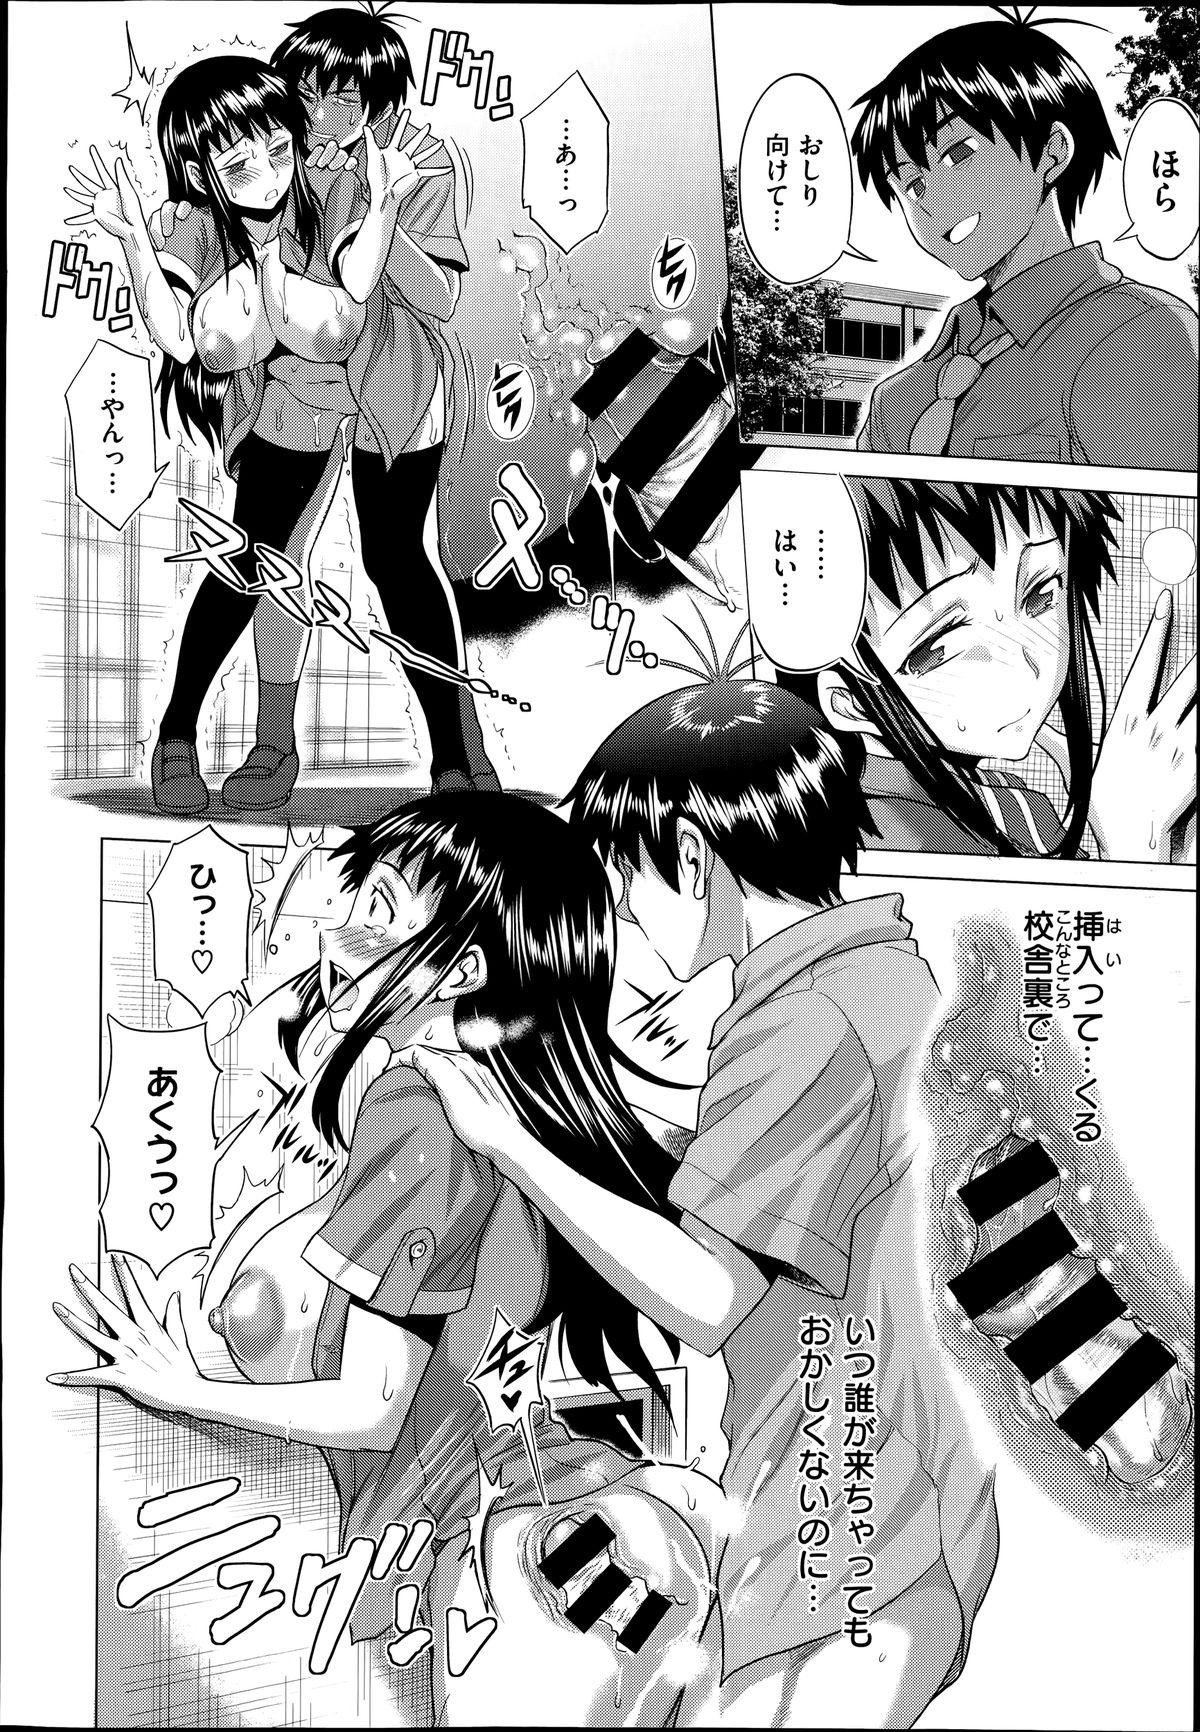 Heels Joshi Luck Girl's Lacrosse Club Ending Chapters Made - Page 8